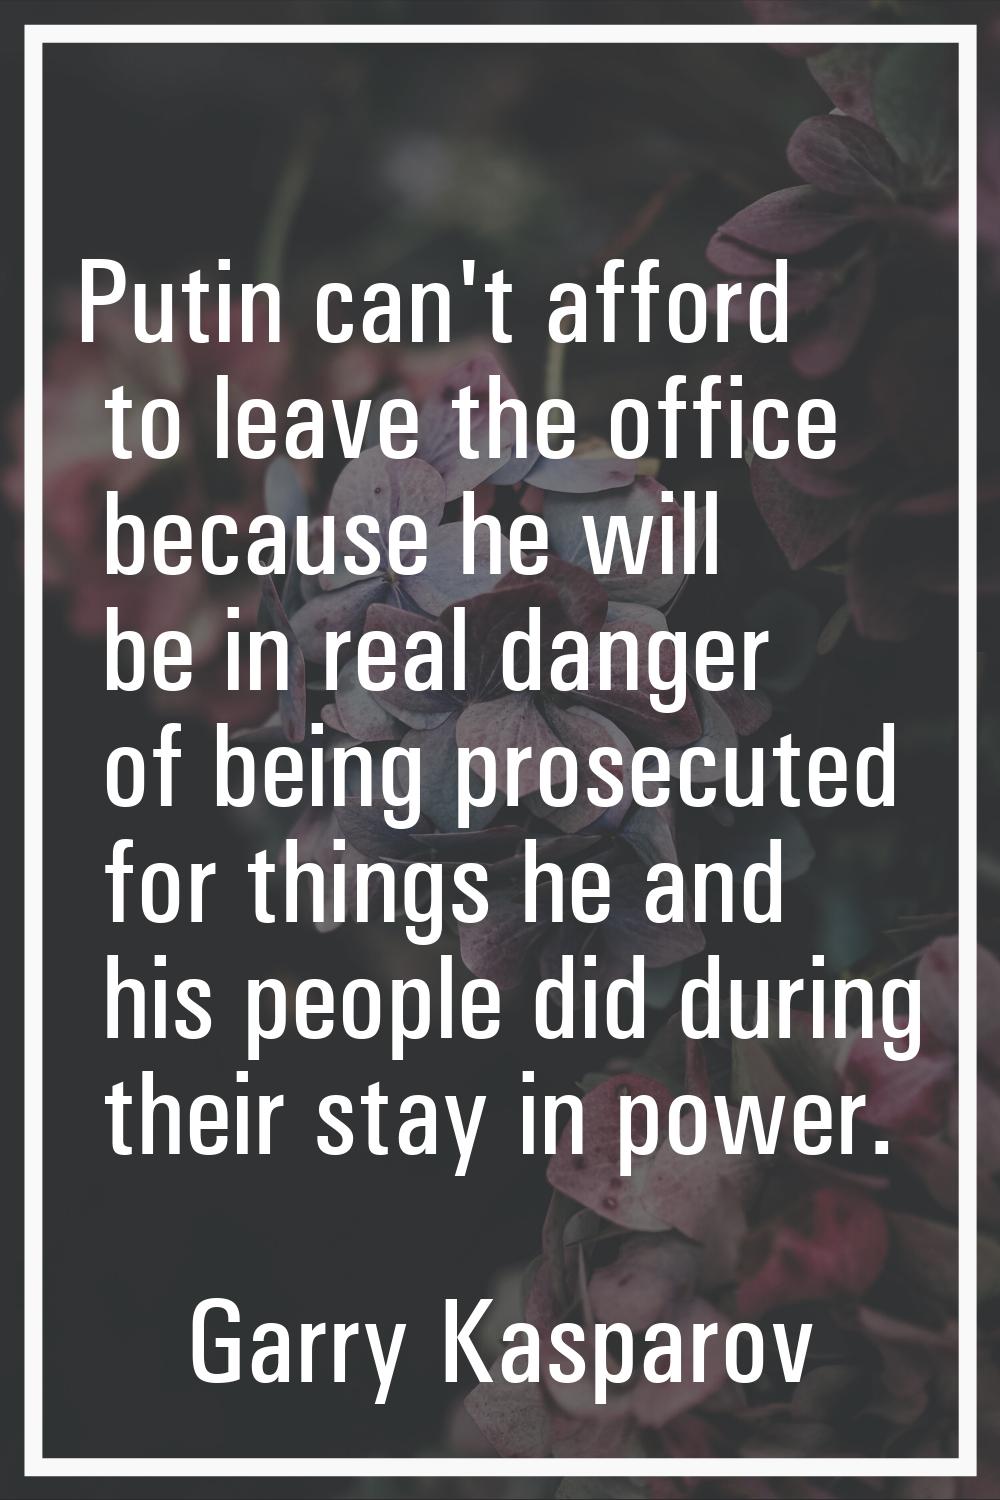 Putin can't afford to leave the office because he will be in real danger of being prosecuted for th